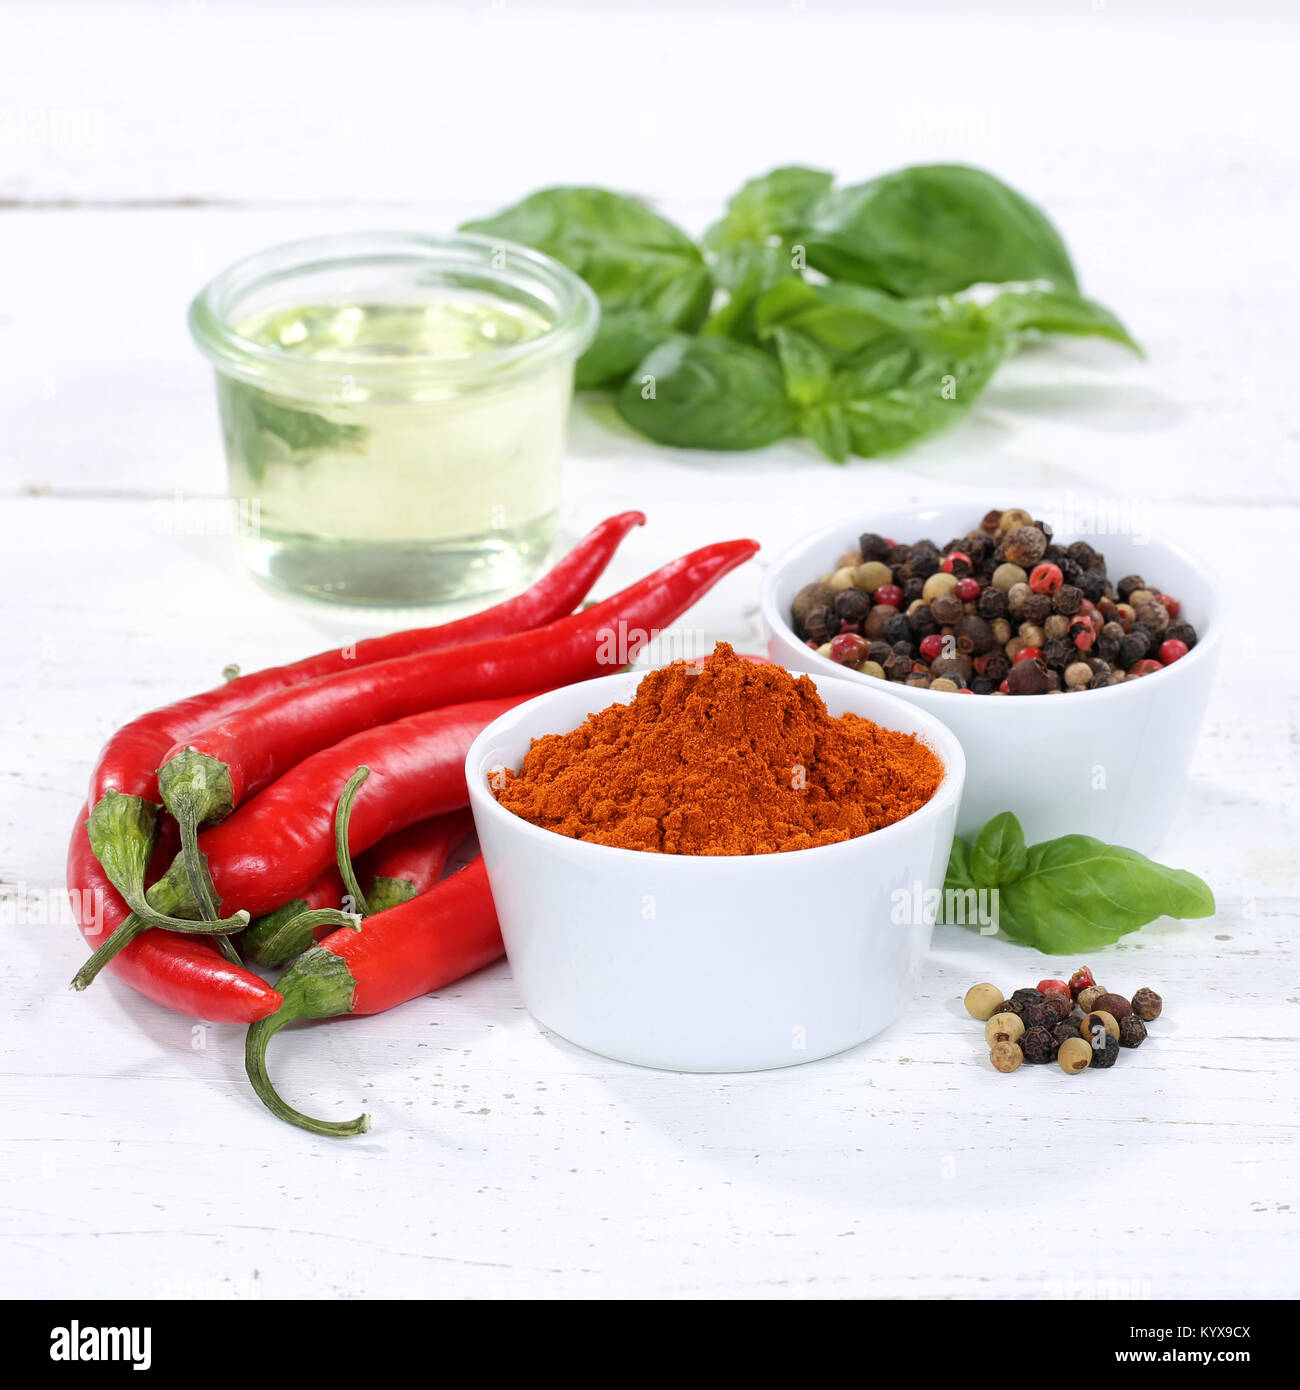 Spices cooking ingredients paprika powder square spicy red hot chili peppers chilli spice Stock Photo